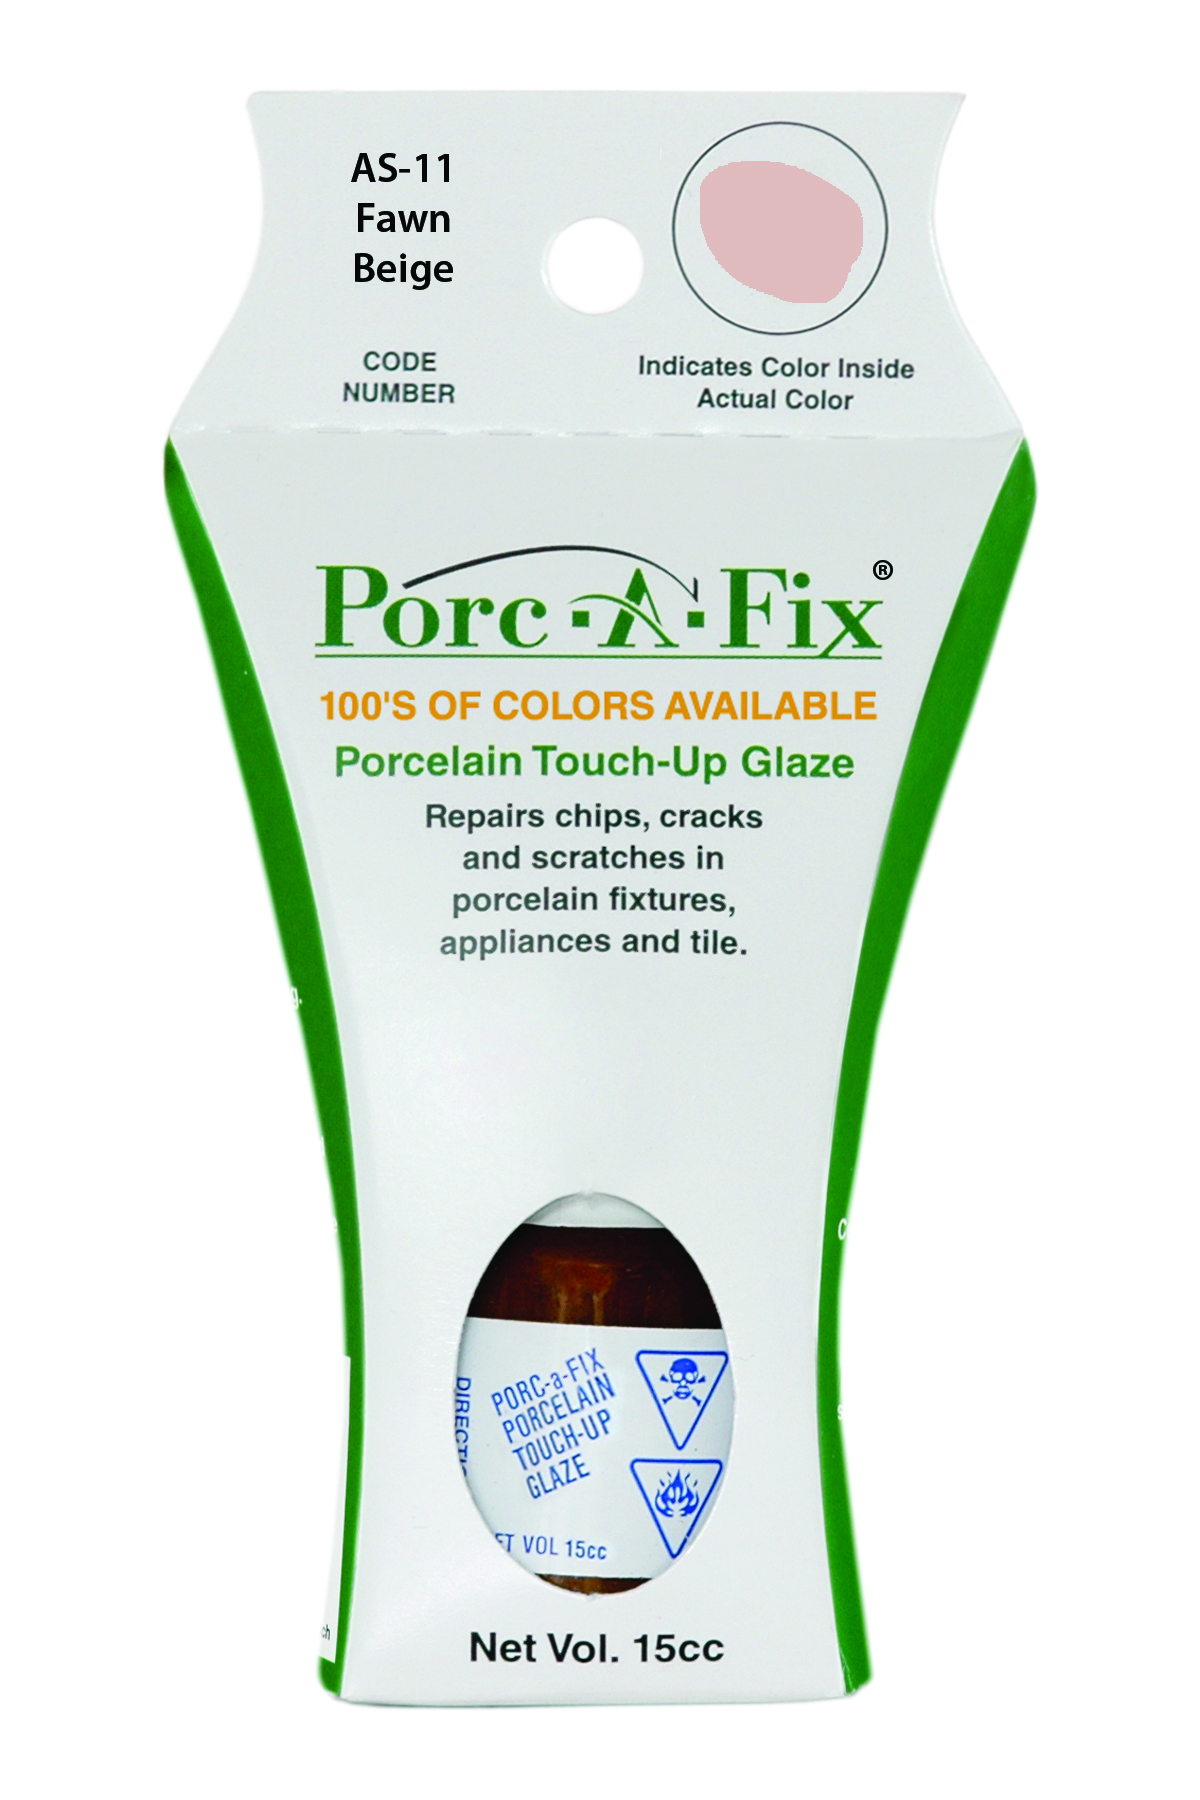 Fixture-Fix | AS-11 | Porc-A-Fix Touch-Up Glaze American Standard Fawn Beige - Compatible with American Standard 070900-0450A Touch Up Paint Kit - FAWN BEIGE